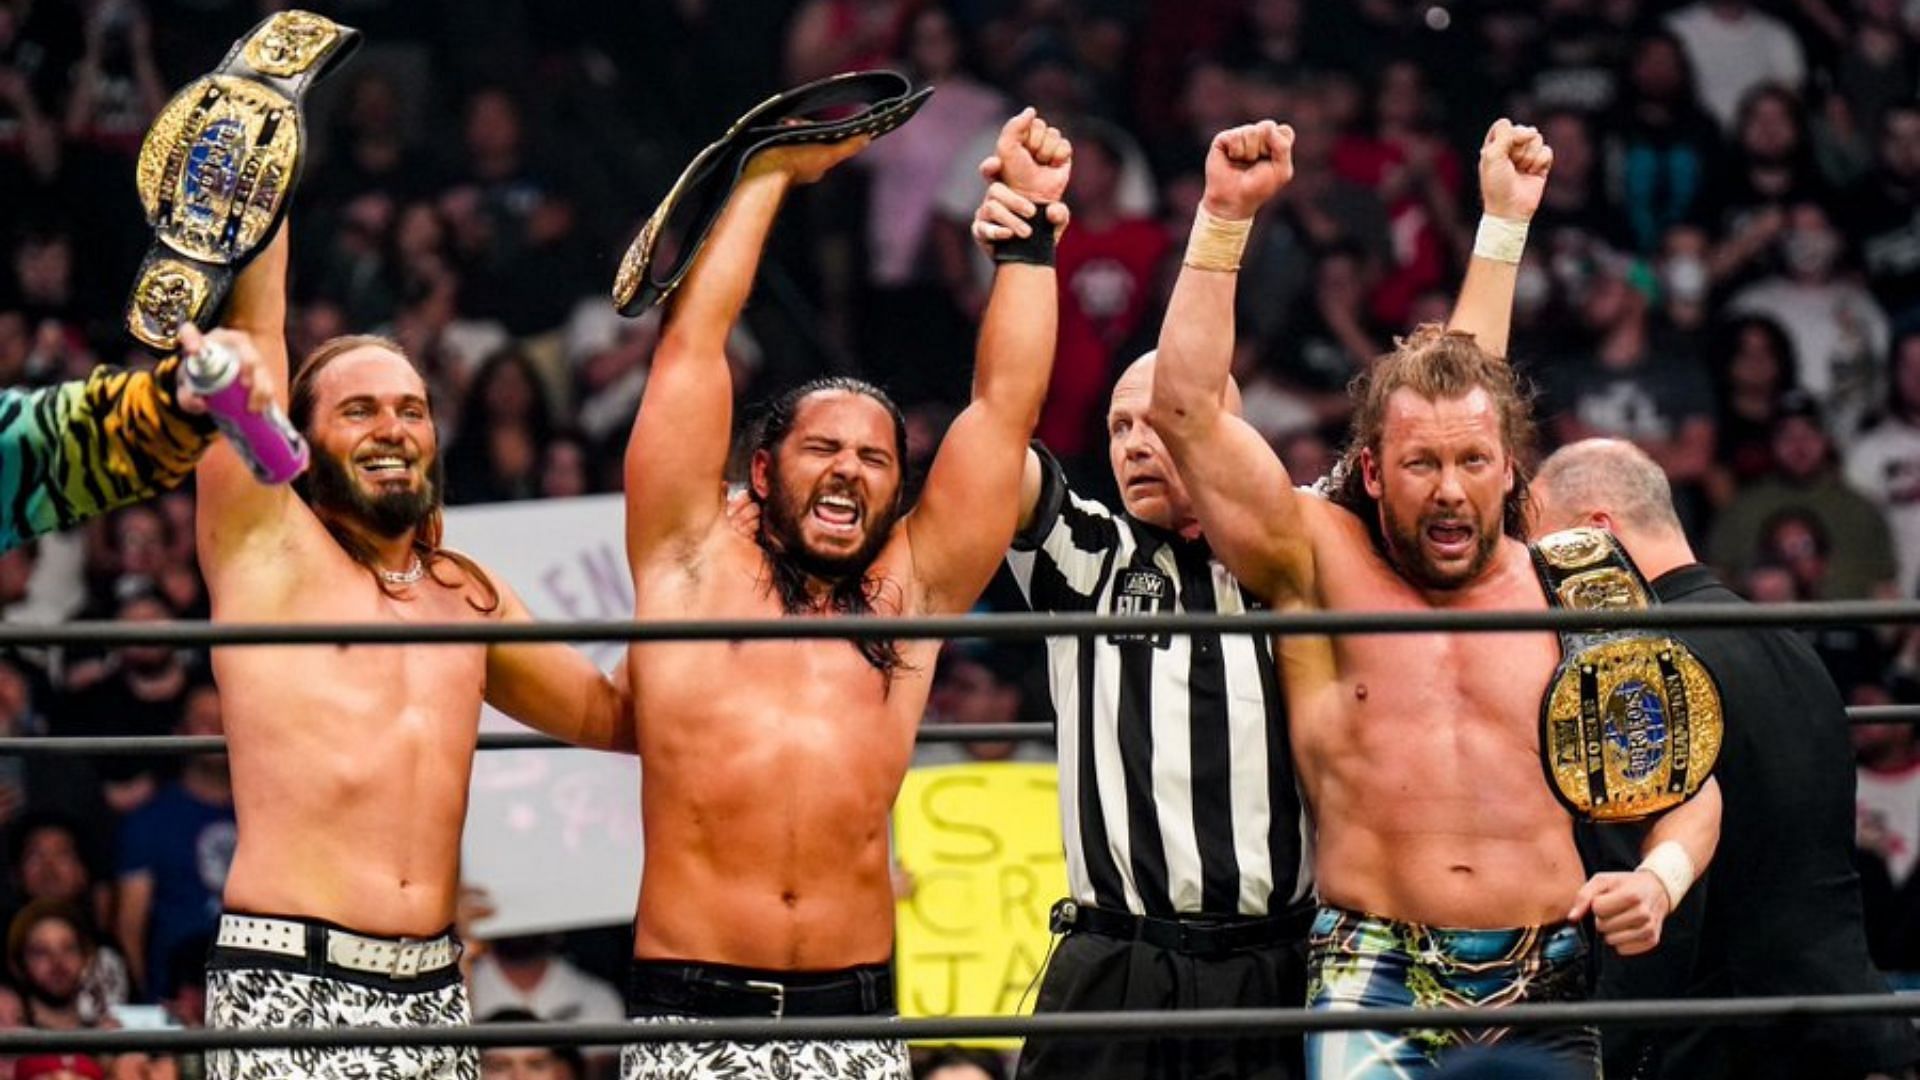 The Elite could be on their way back to AEW